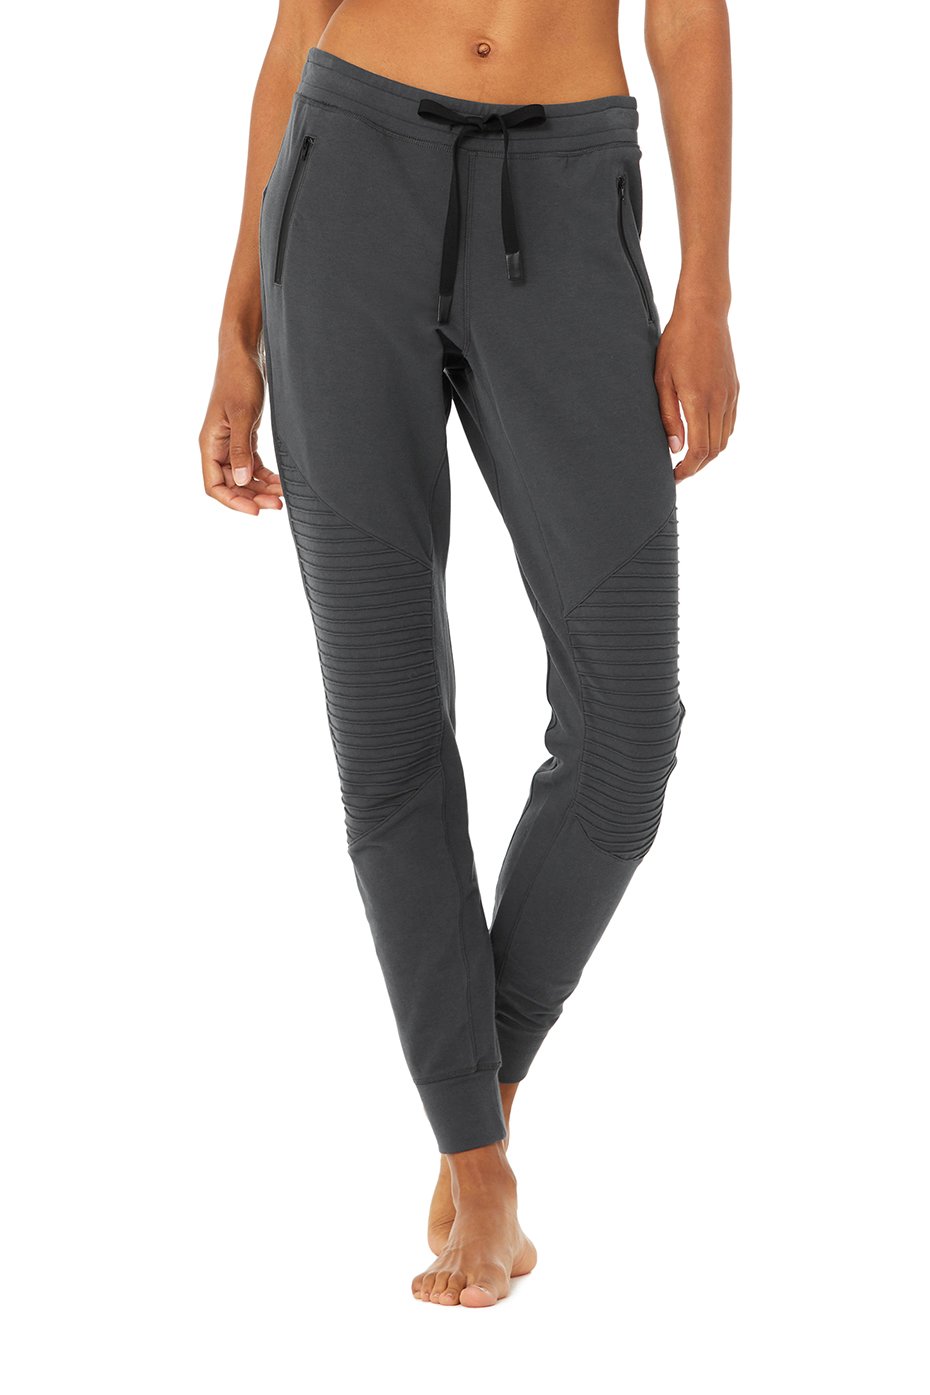 Urban Moto Sweatpant in Anthracite by Alo Yoga Ballet